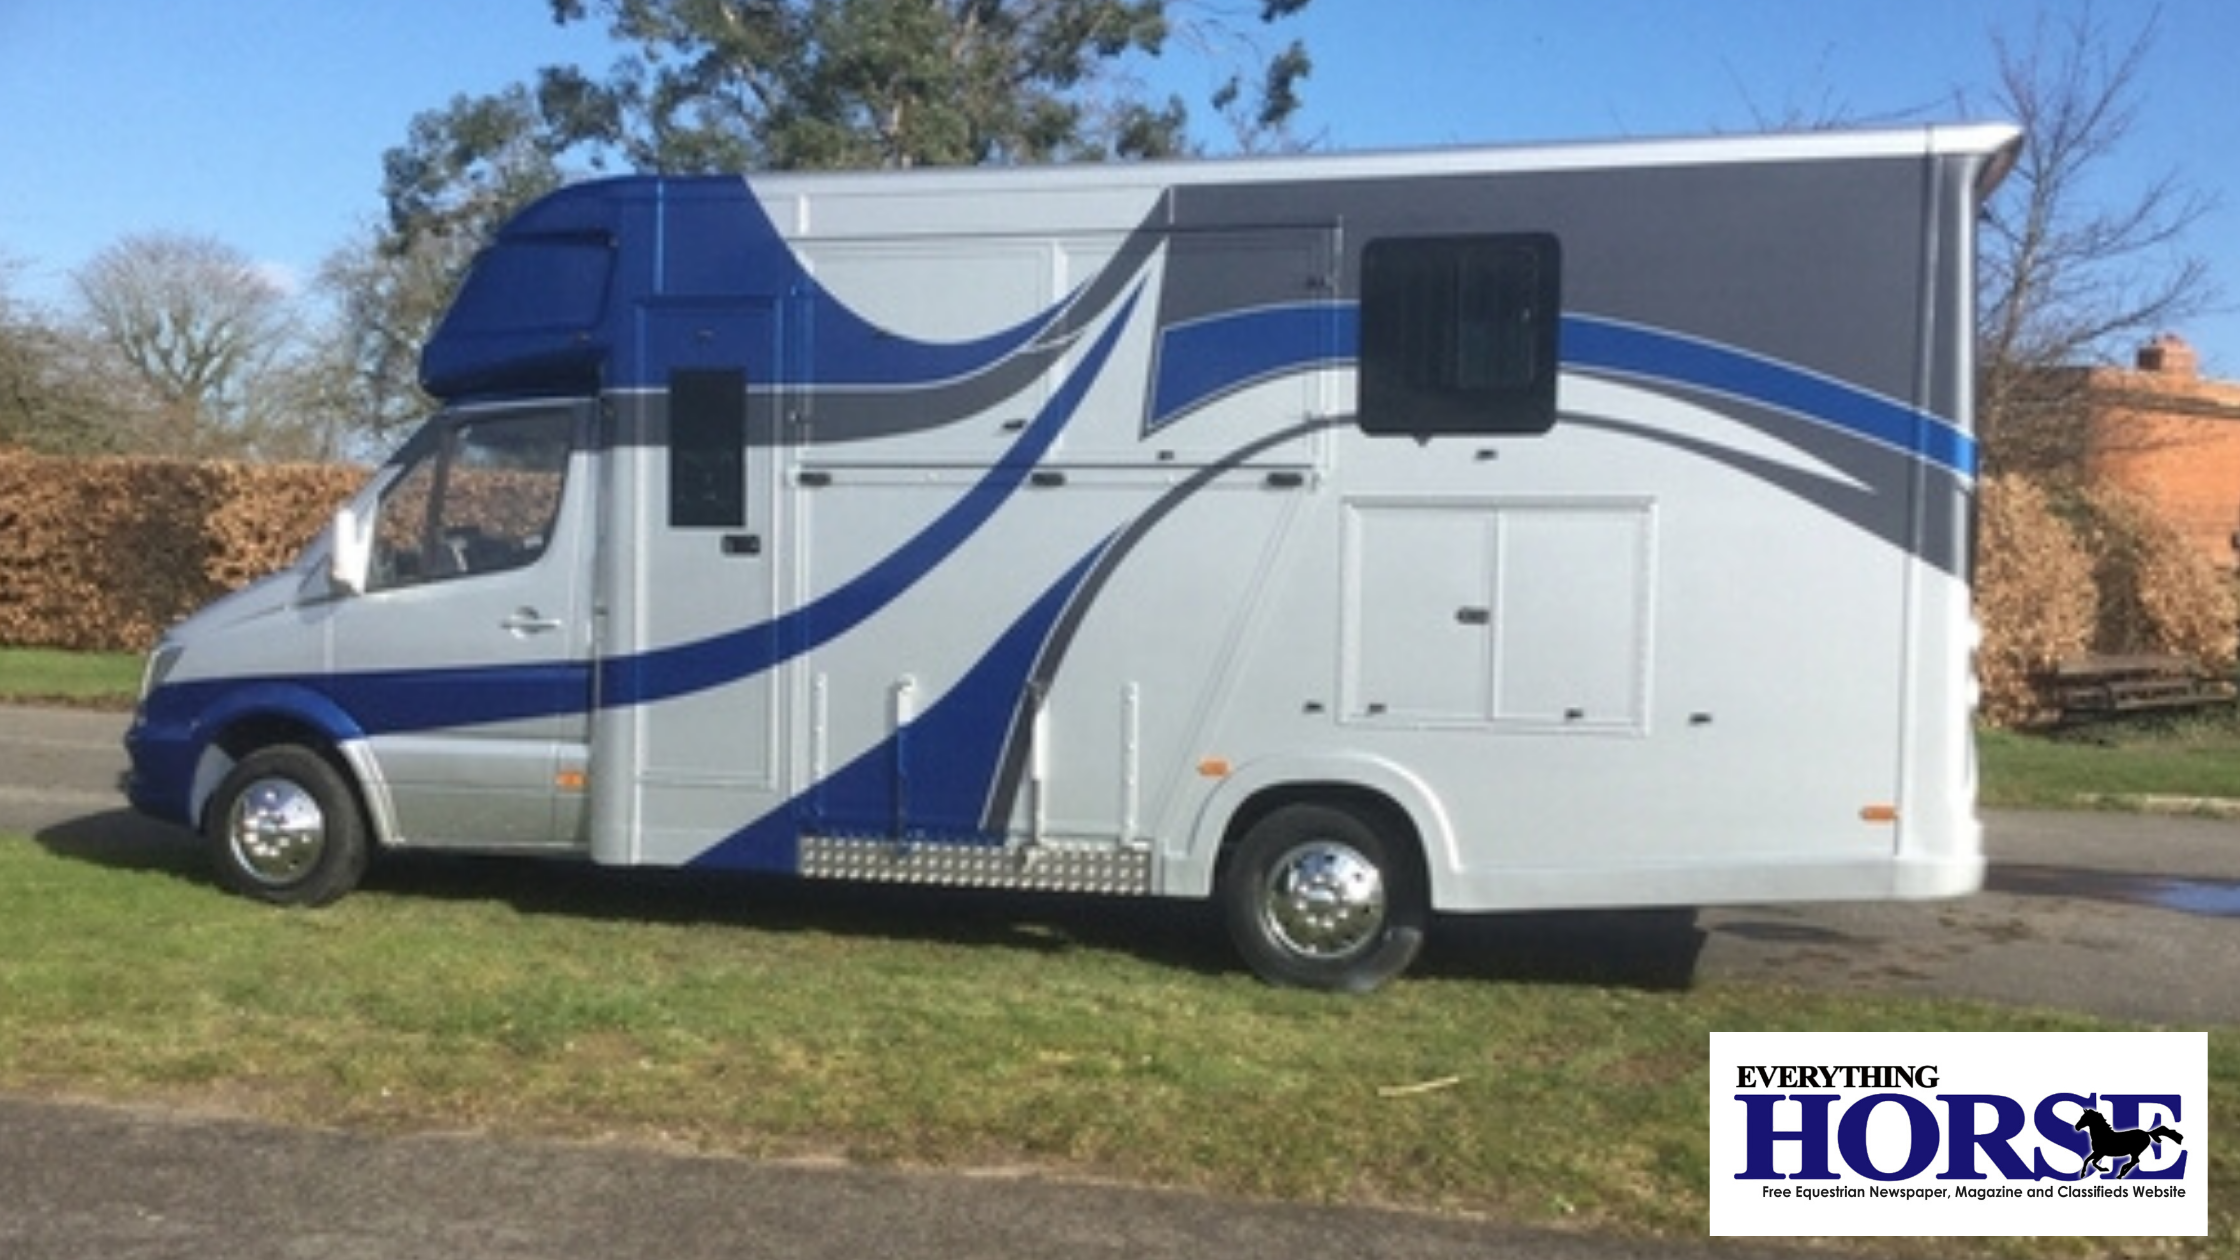 Horseboxes for Sale - Everything Horse Classifieds